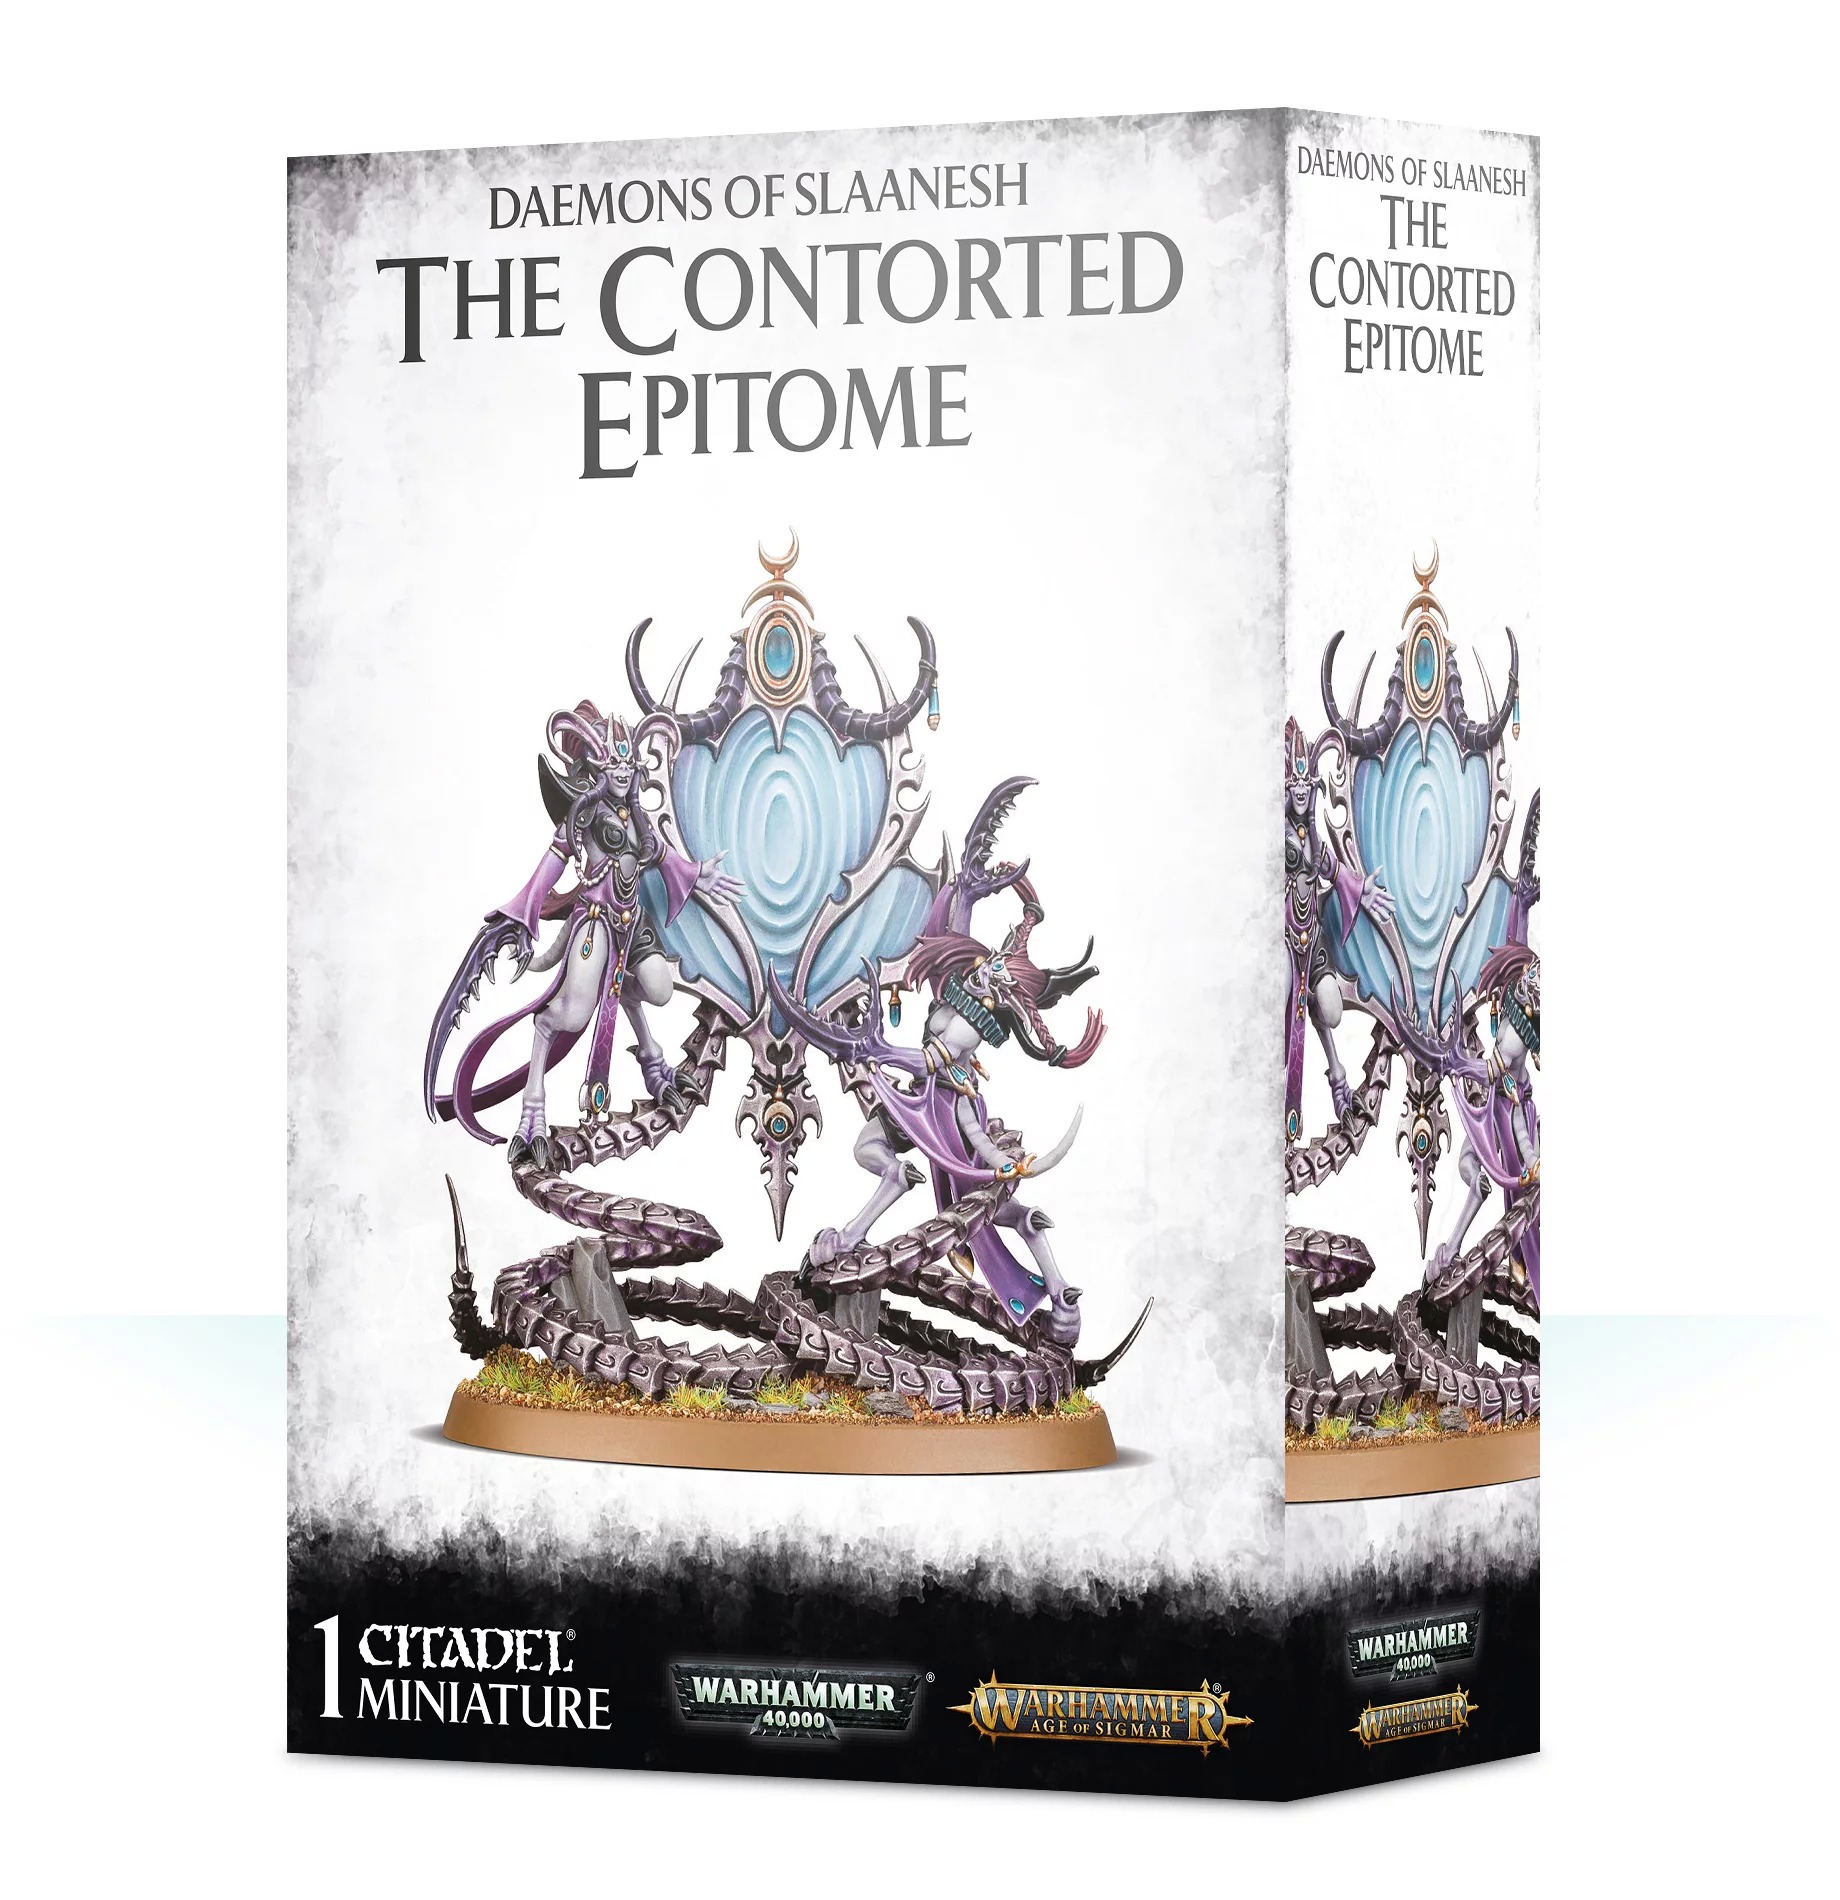 Warhammer Age of Sigmar: Hedonites of Slaanesh: The Contorted Epitome 